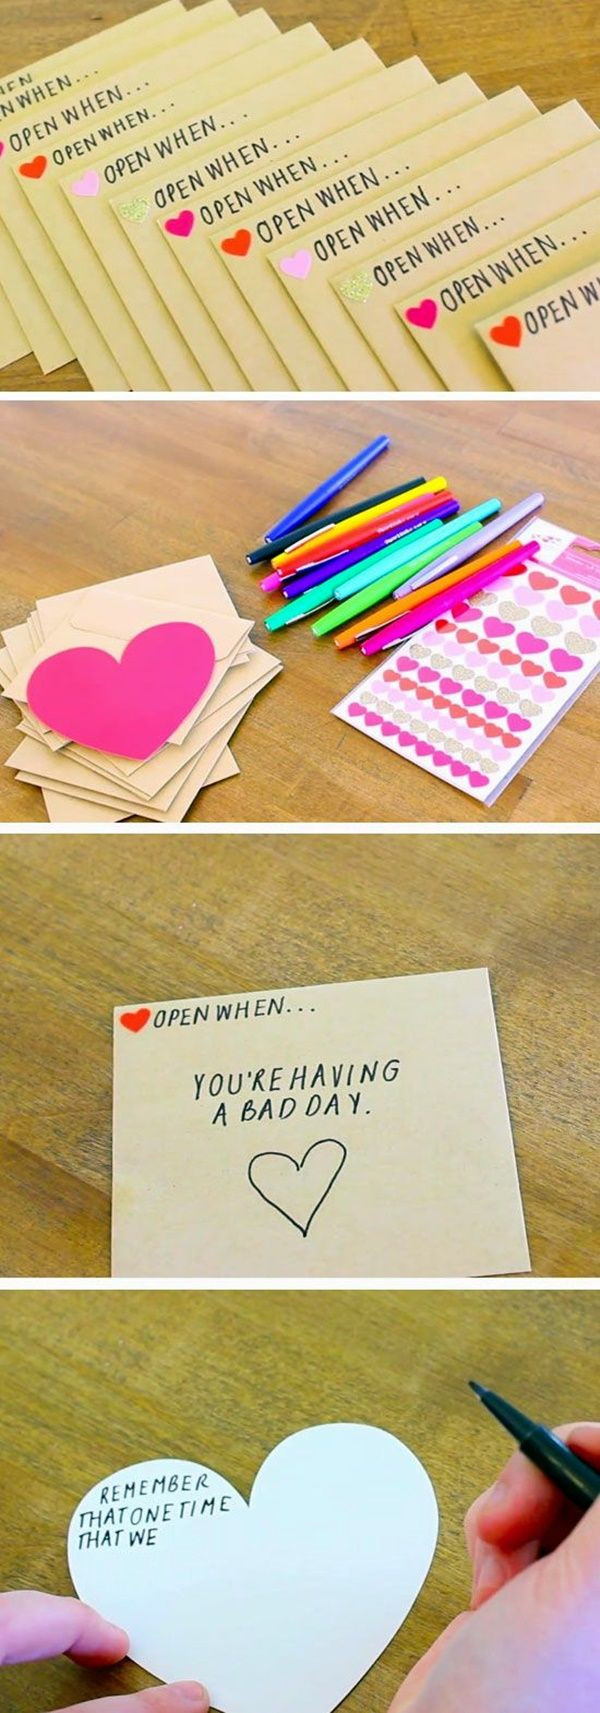 Valentines Day Gifts For Him Homemade
 101 Homemade Valentines Day Ideas for Him that re really